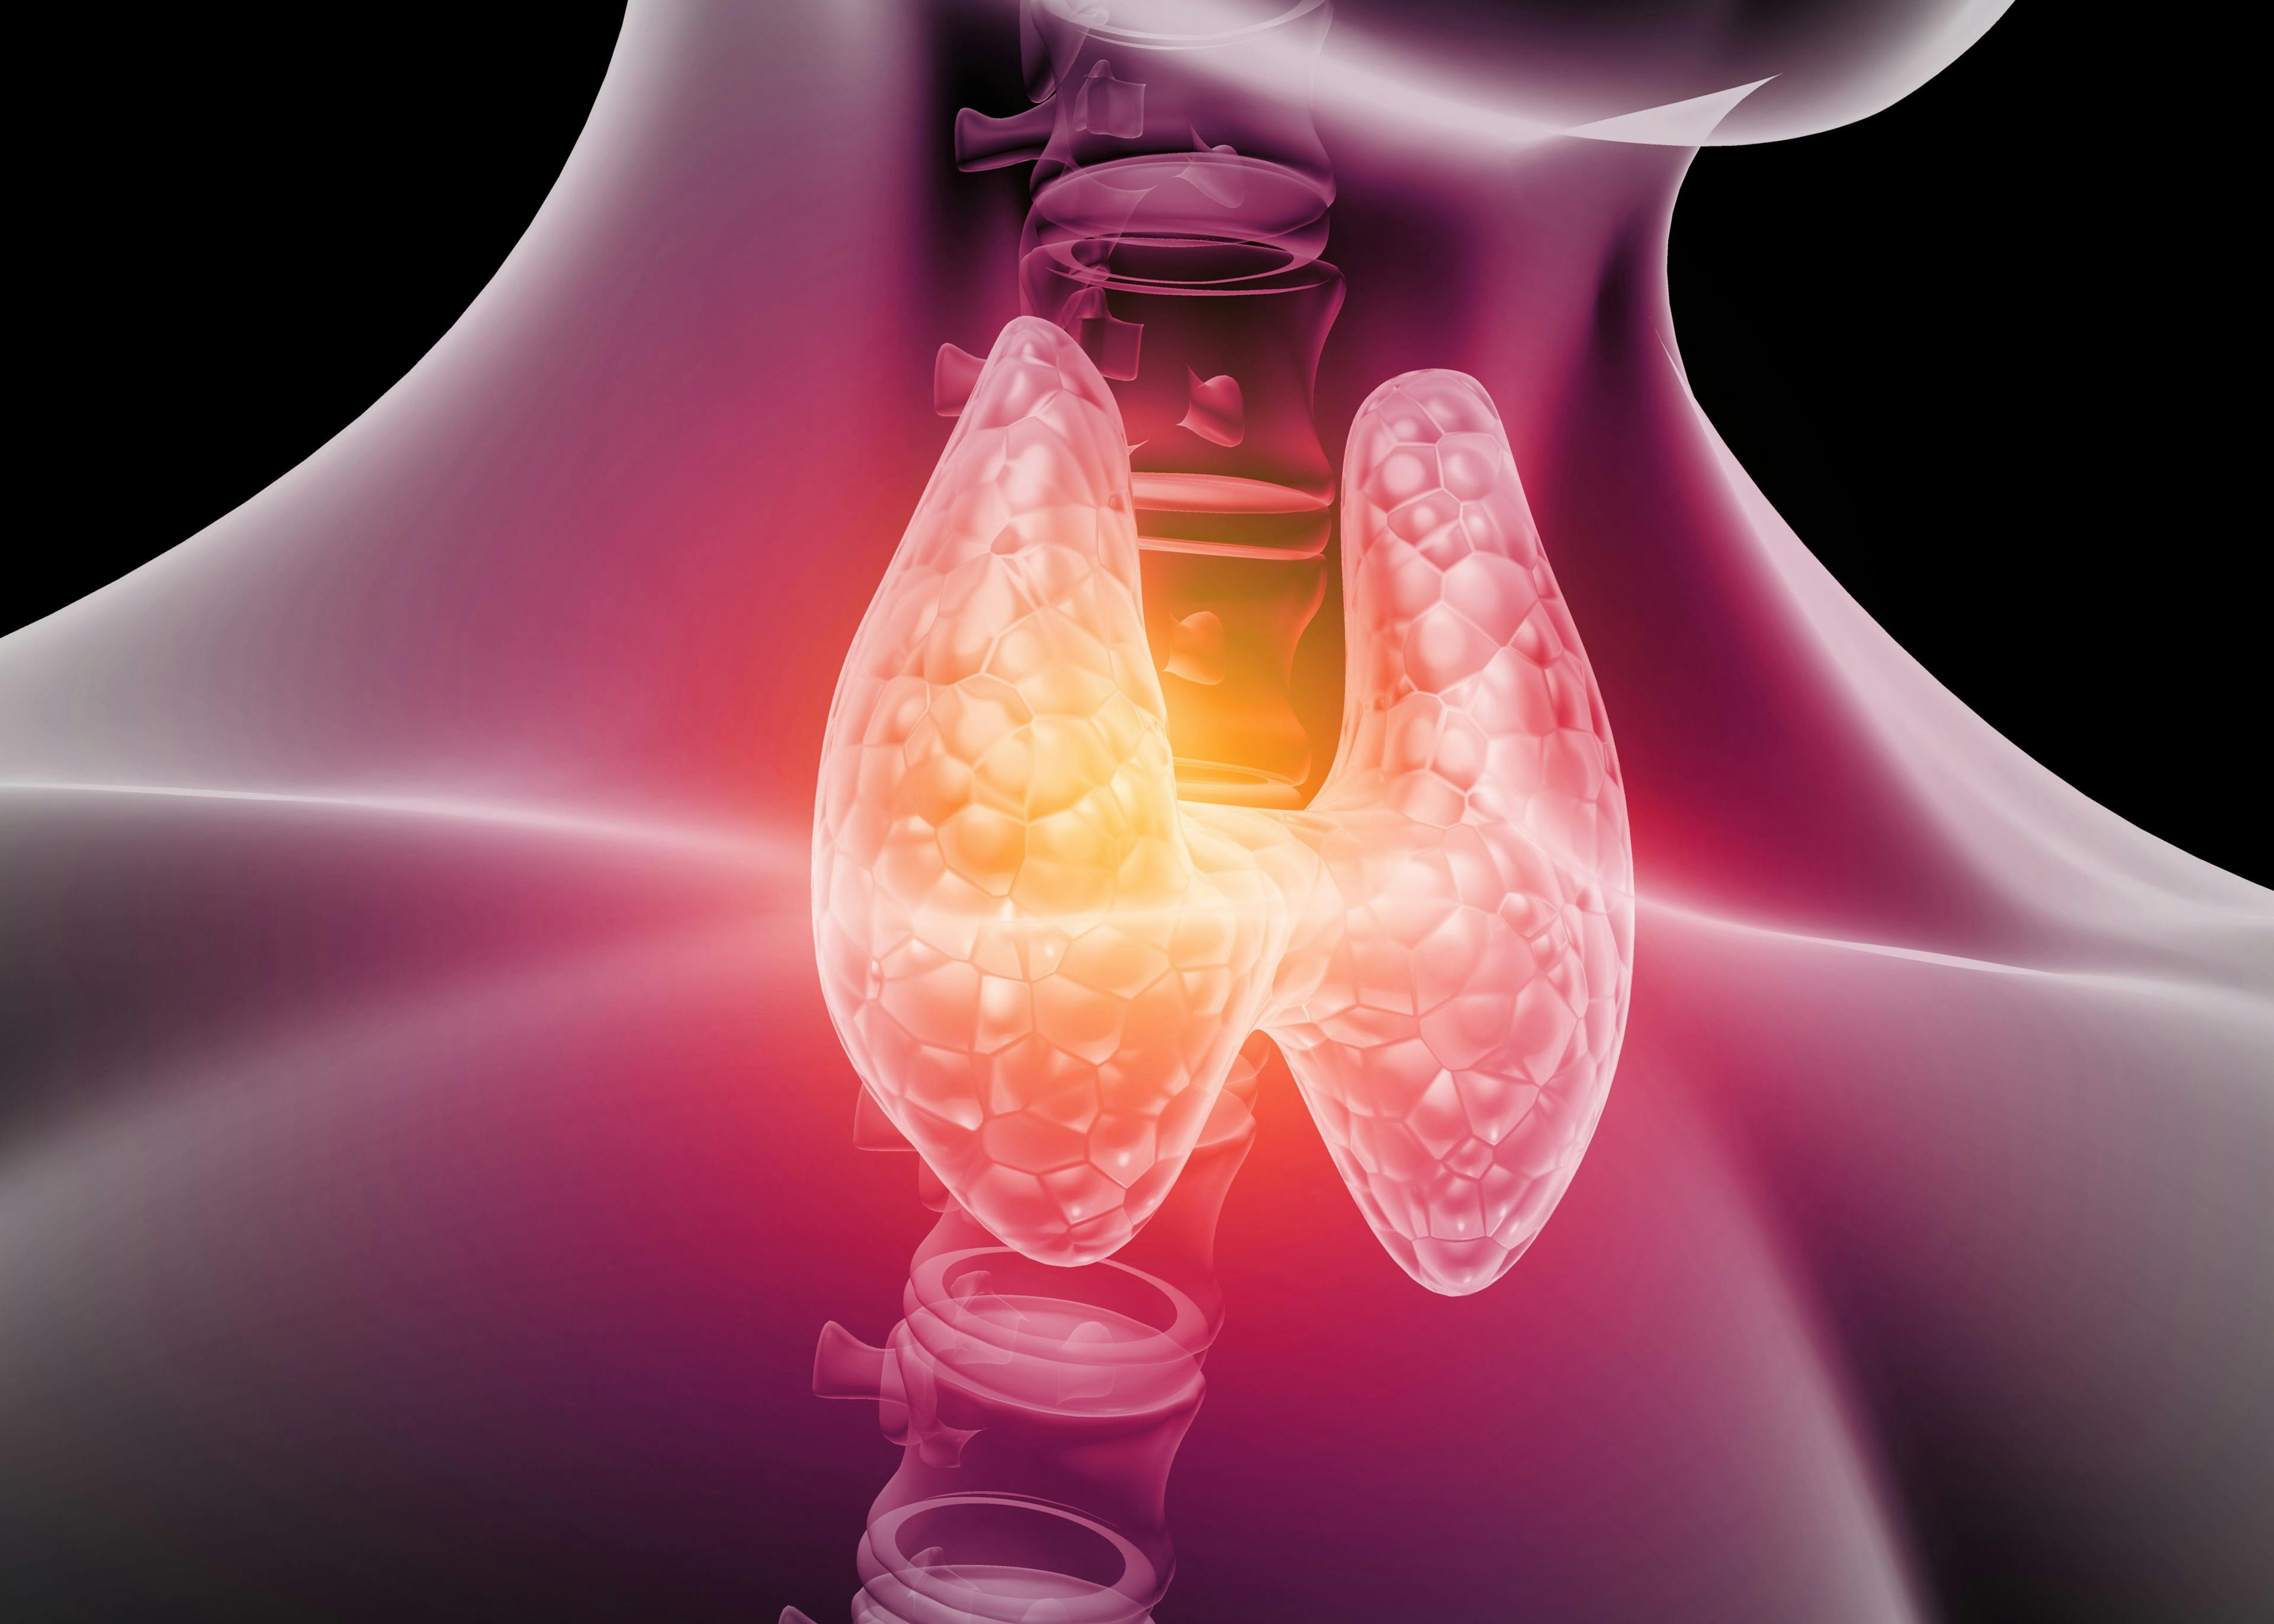 Exelixis Submits Cabometyx for Thyroid Cancer